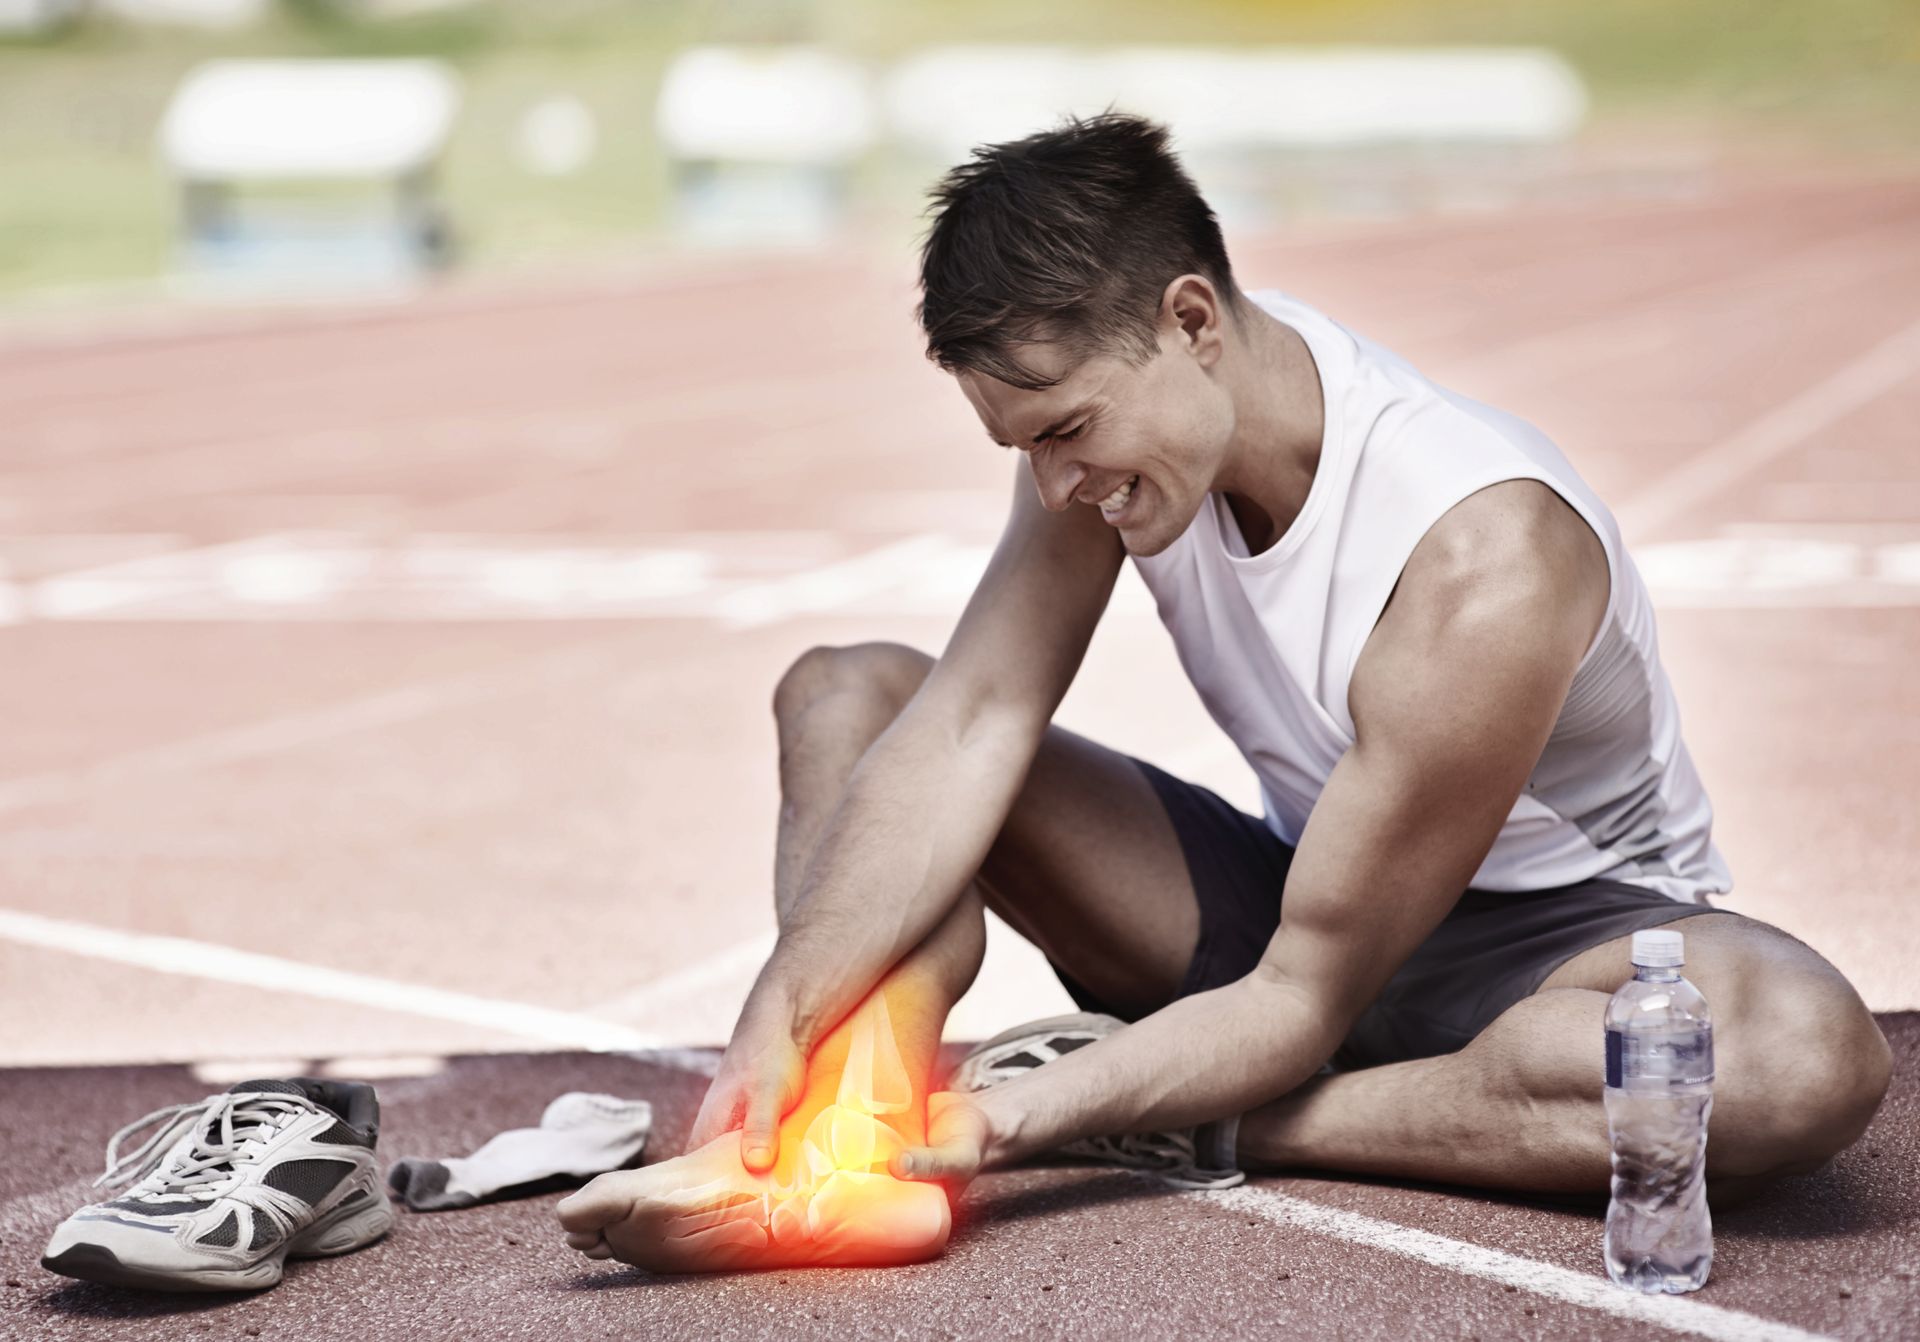 a man is sitting on a track holding his ankle in pain